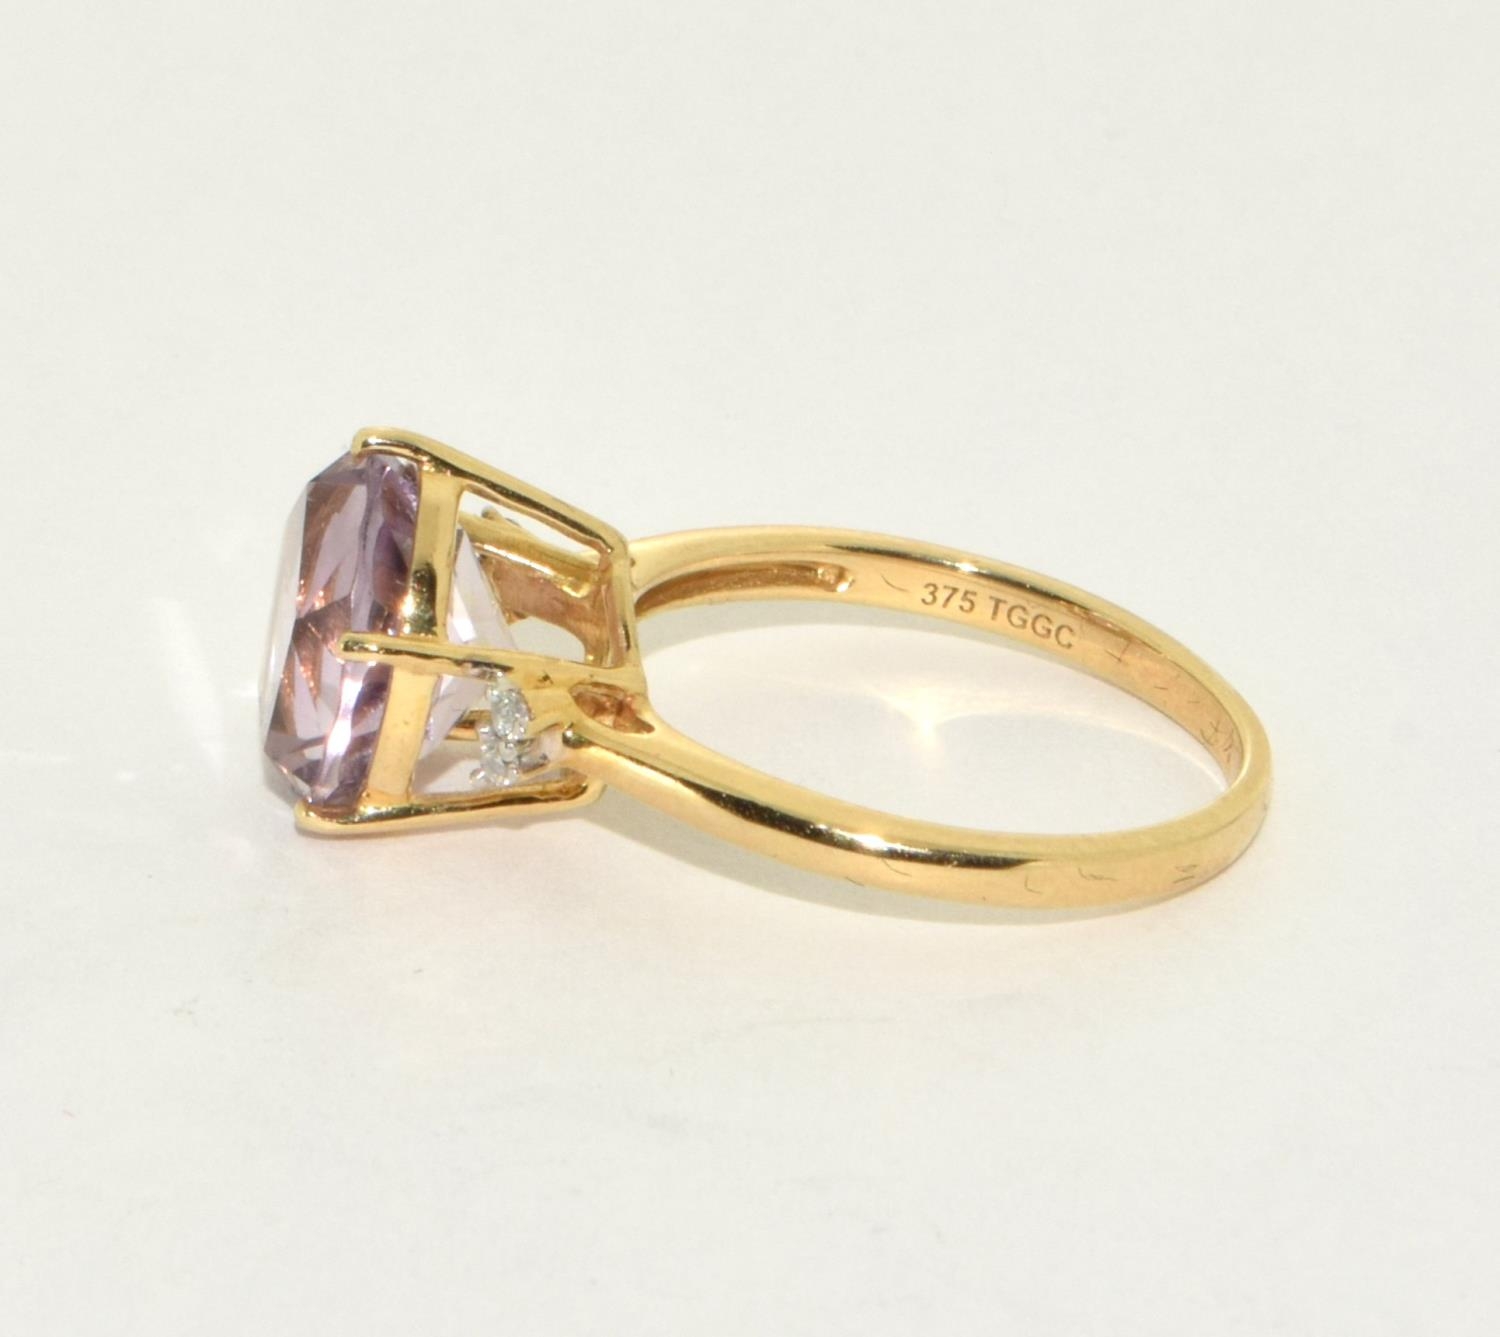 9ct gold ladies Large Amethyst solitaire with of set Diamond ring size N - Image 2 of 5